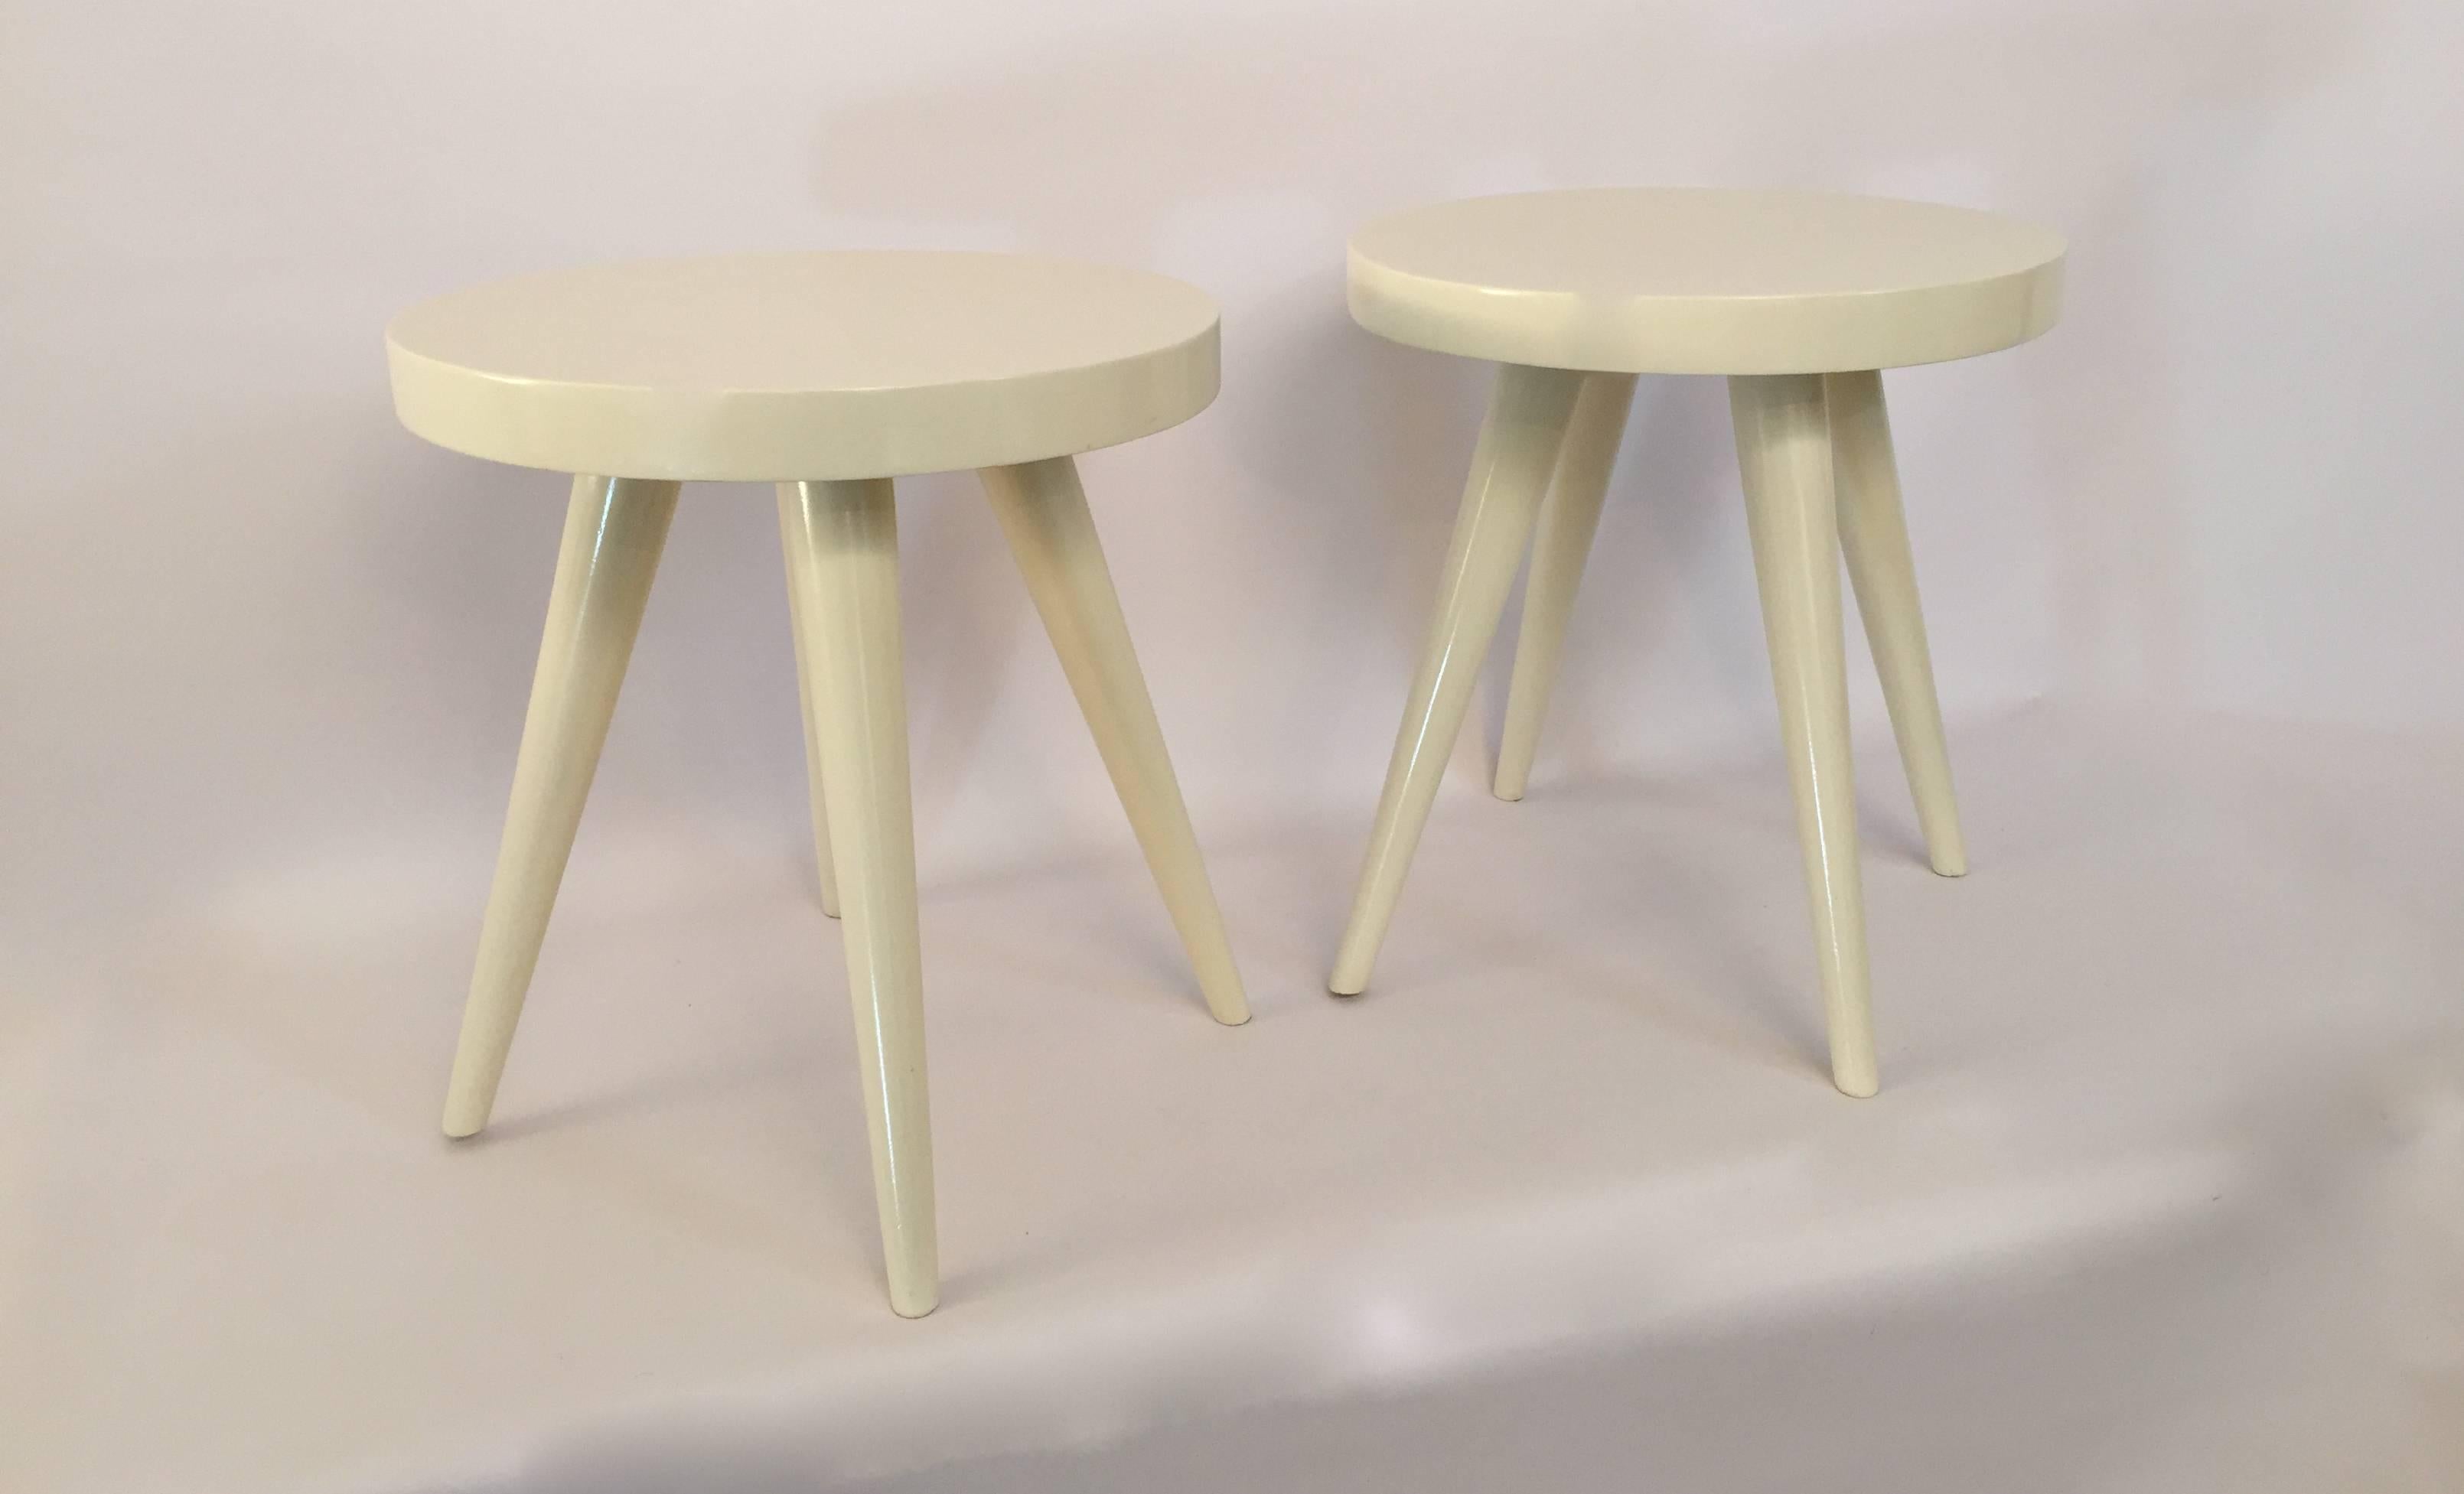 Excellent pair of four legged stools in the manner of Charlotte Perriand, circa 1950-1960. Thick solid wood top and elegantly tapered legs.

Measures: 15.5